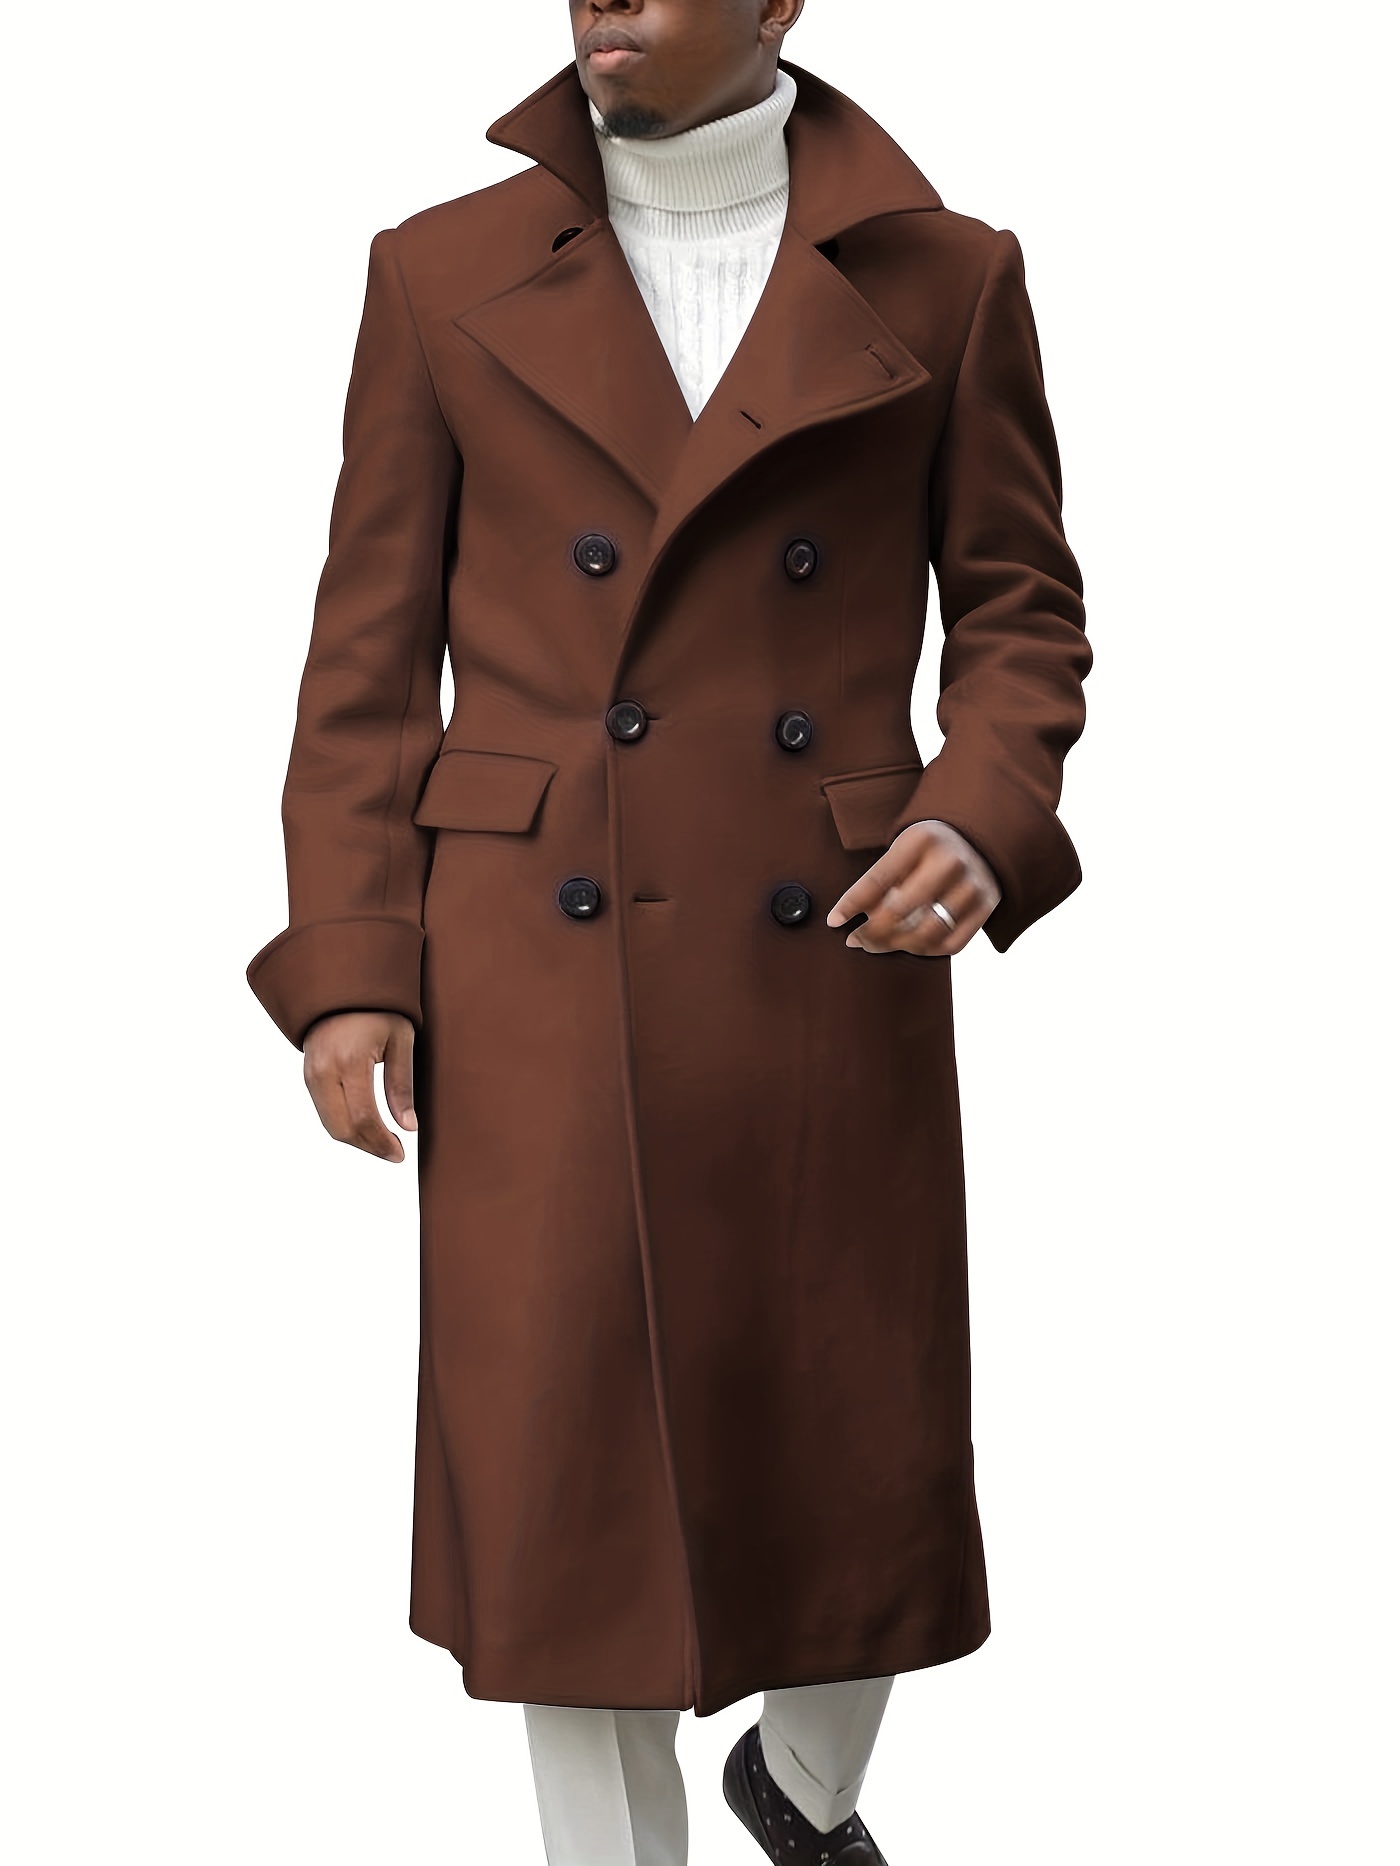 mens notch lapel double breasted long trench coat casual windproof overcoat details 3